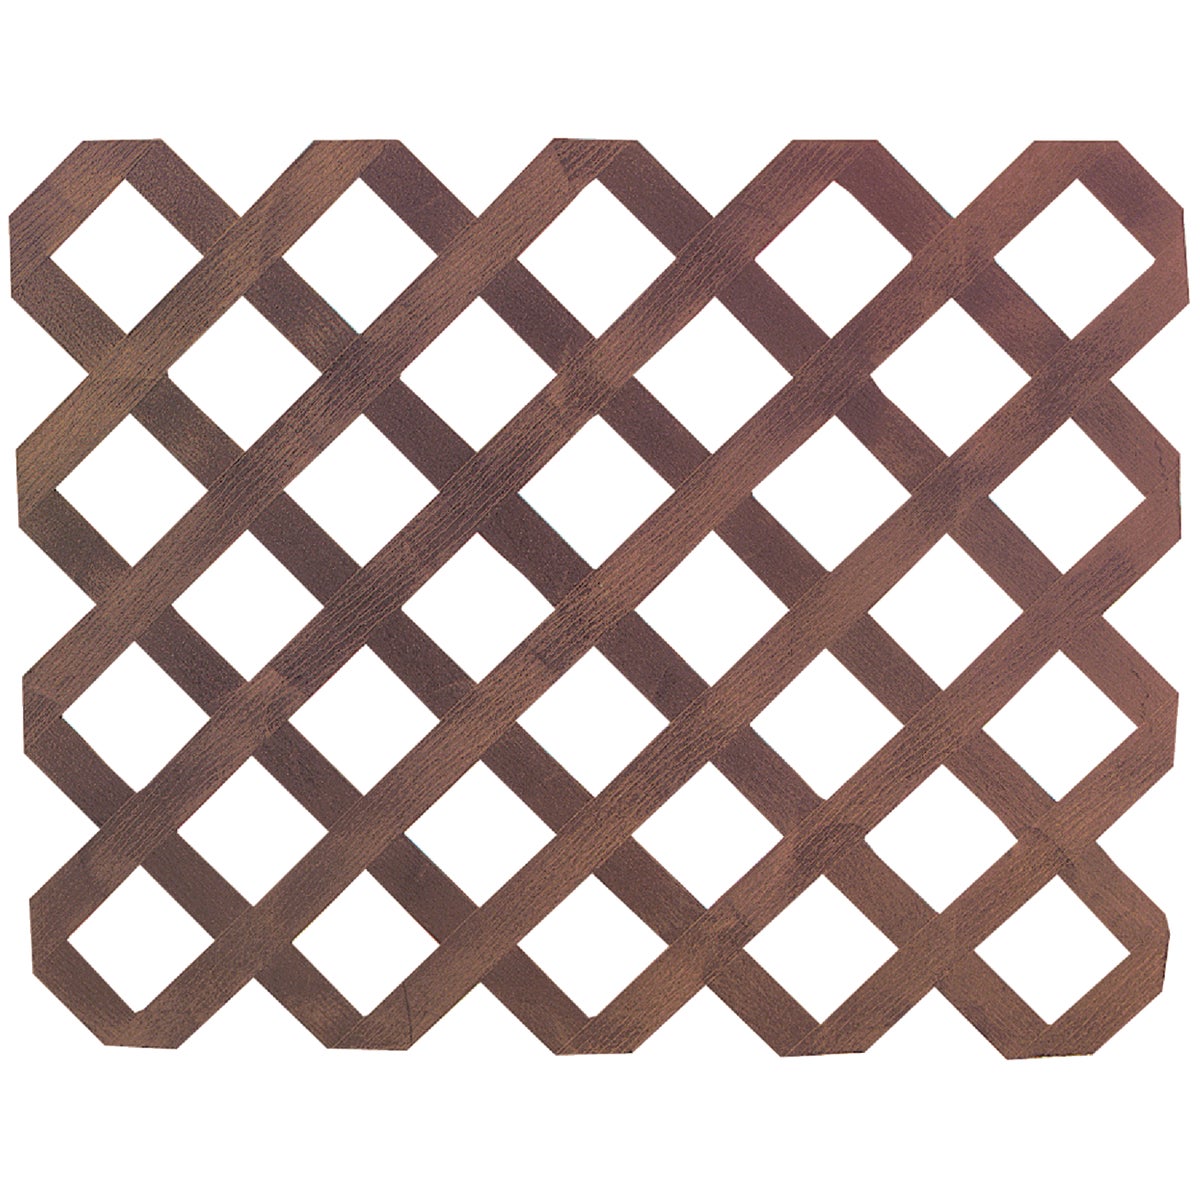 Real Wood Products 4 Ft. W. x 8 Ft. L. x 3/4 In. Thick Natural Cedar Privacy Lattice Panel